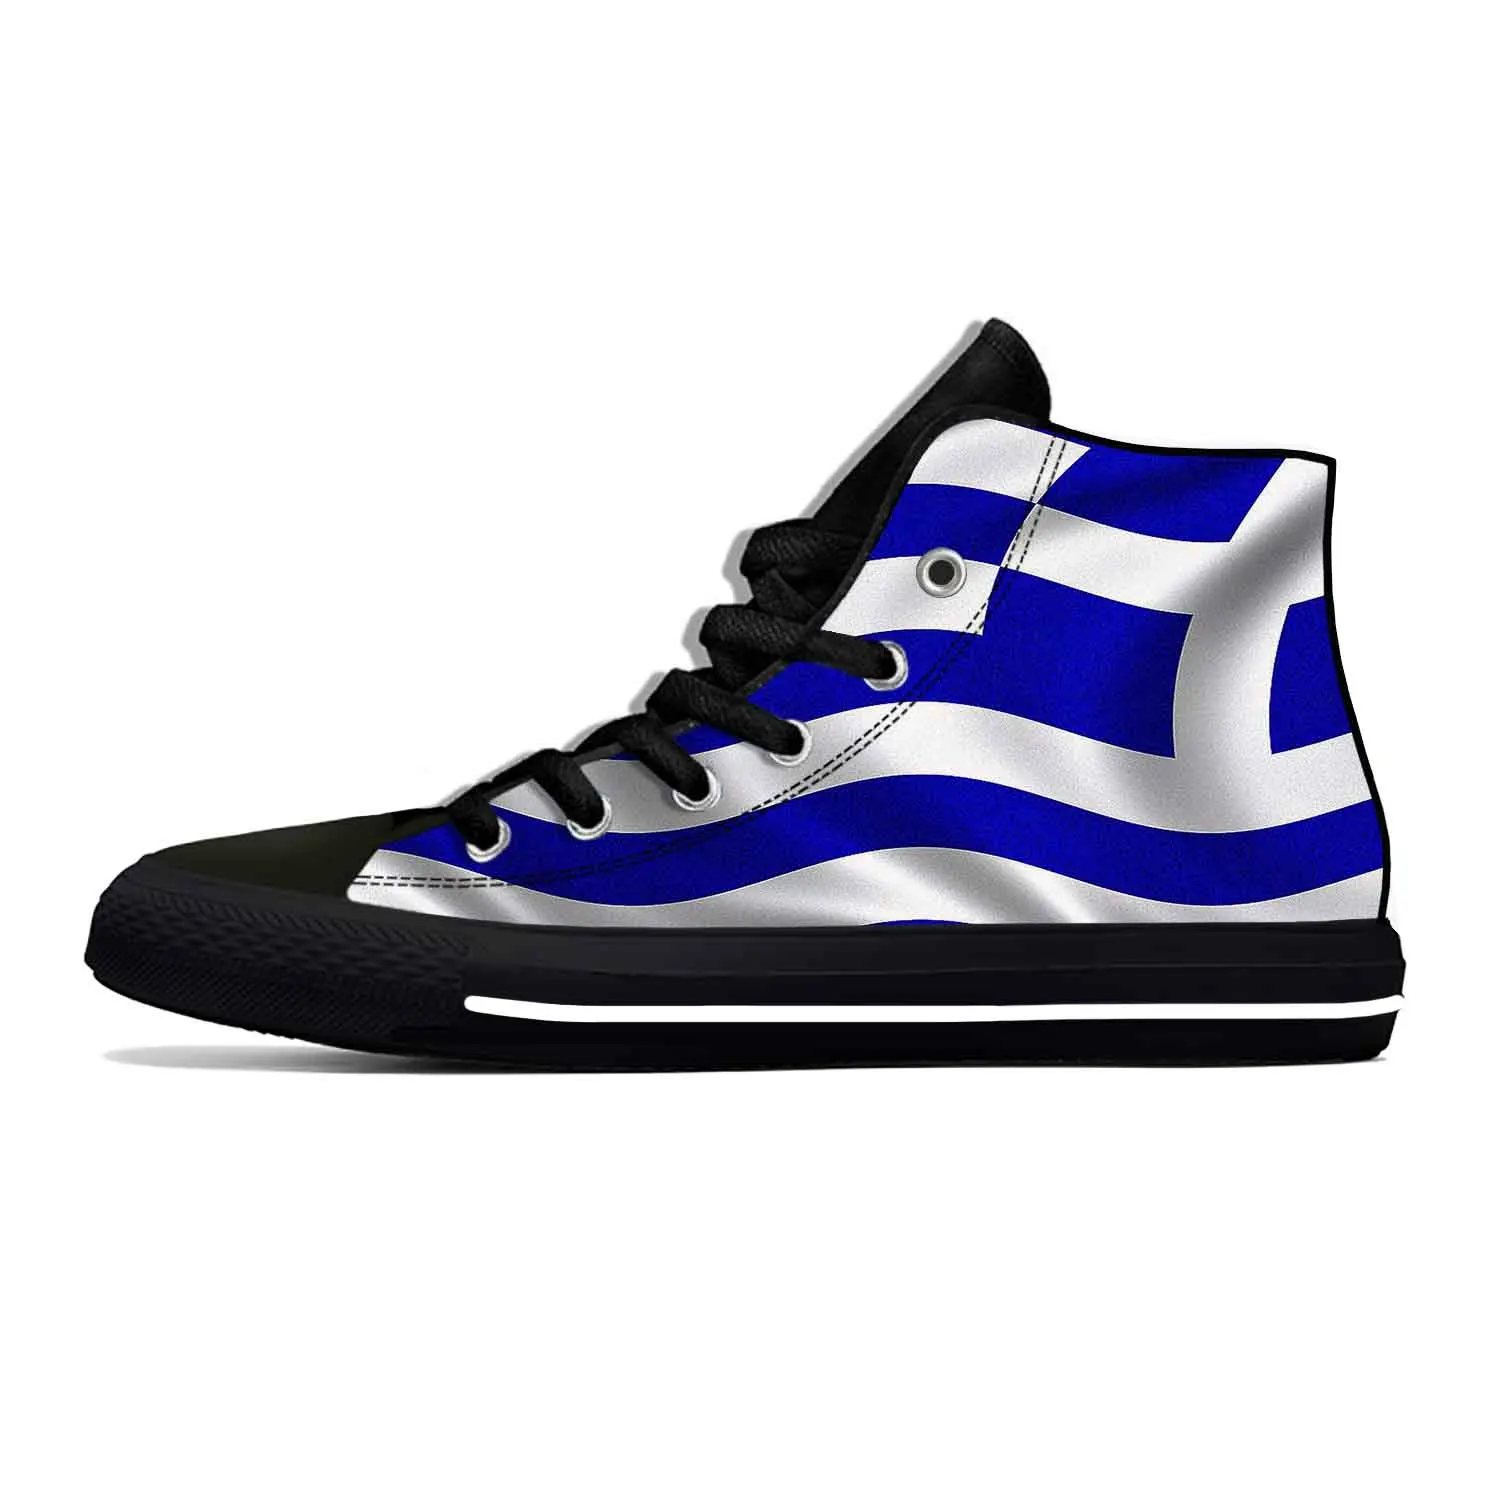 

Hellenic Greek Greece Flag Patriotic Cool Fashion Casual Cloth Shoes High Top Lightweight Breathable 3D Print Men Women Sneakers